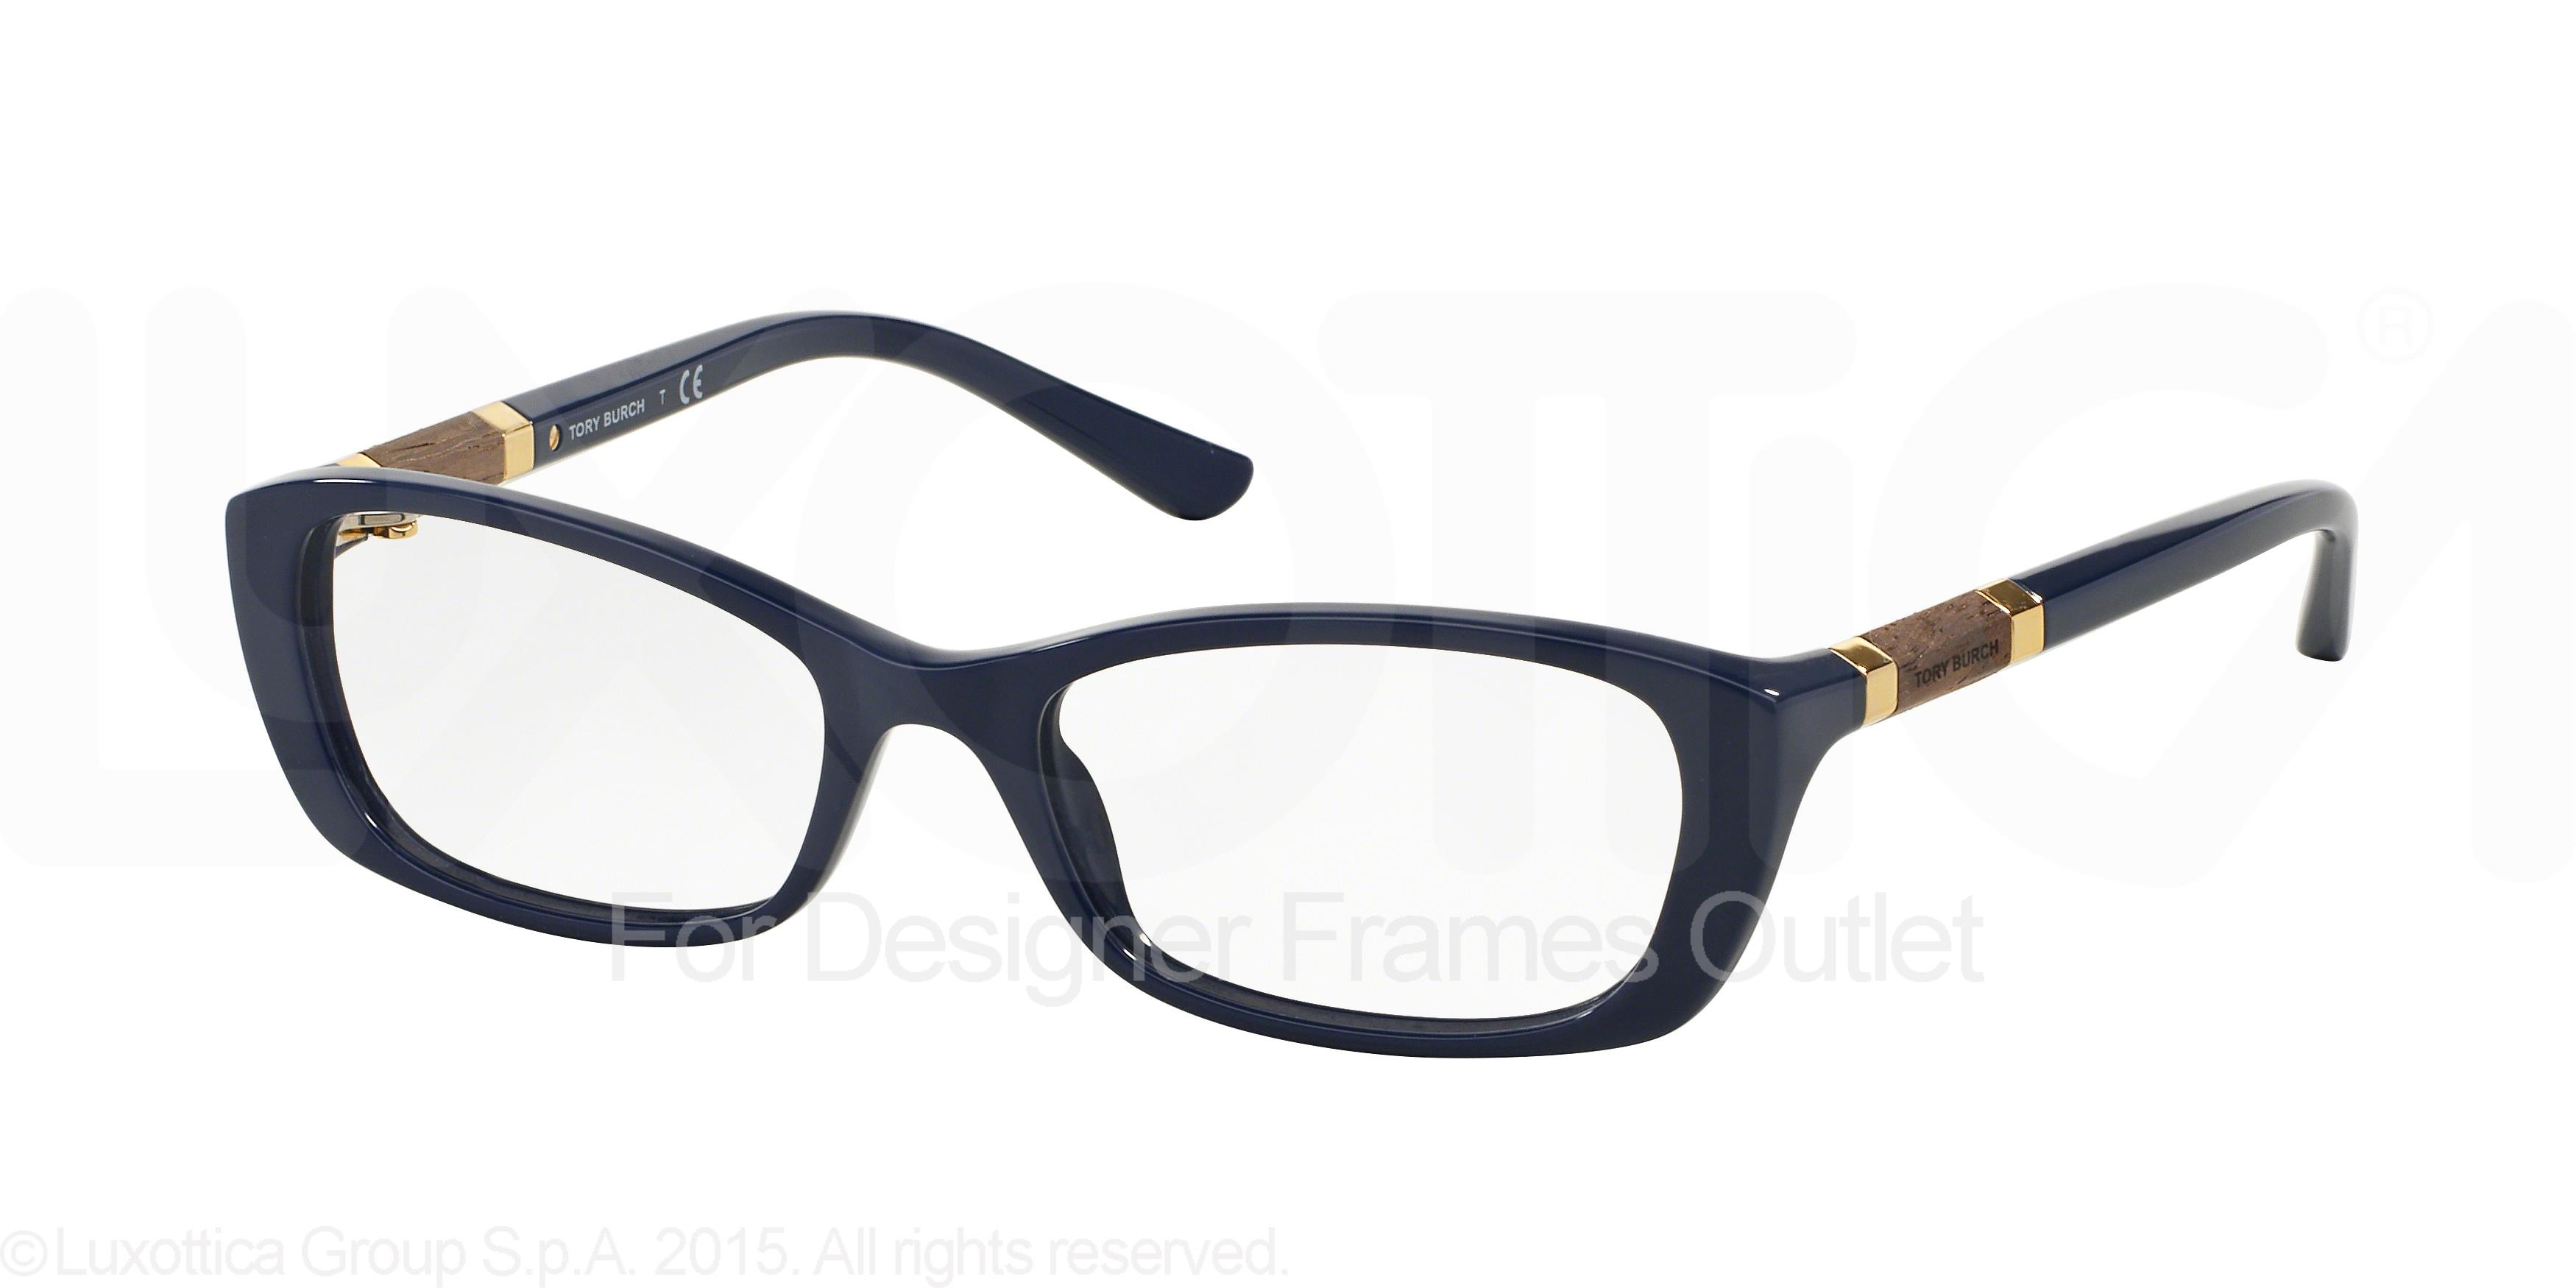 Picture of Tory Burch Eyeglasses TY2054